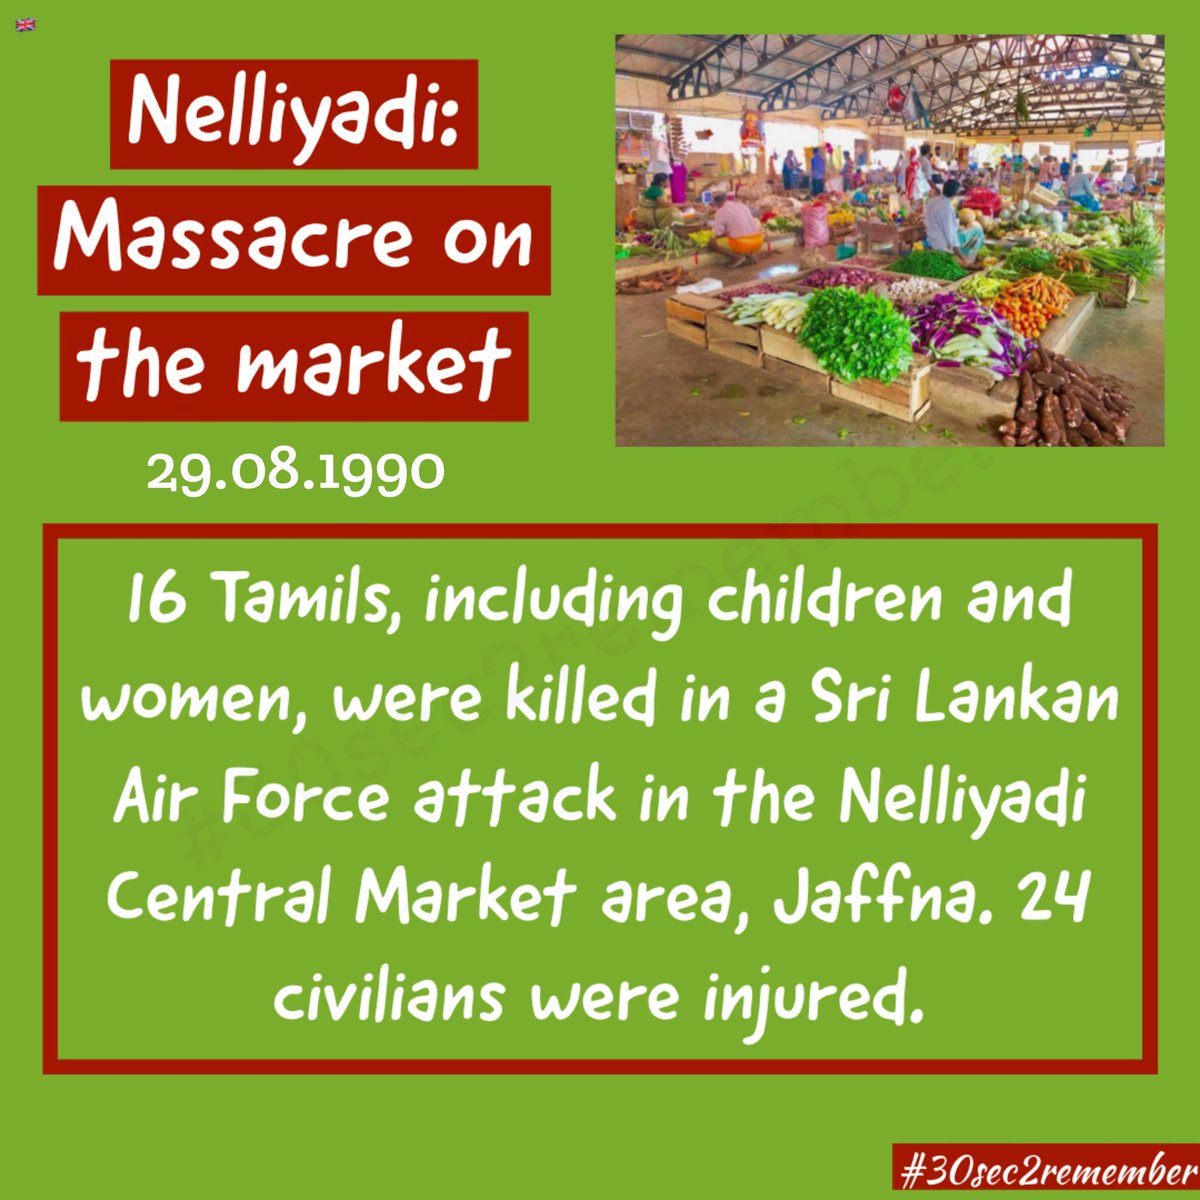 29.08.1990 16 #Tamils, including #children and #women, were #killed in a #SriLankan air force in the #Nelliyadi Central Market area. #30sec2remember #EelamTamilGenocide #Genocide